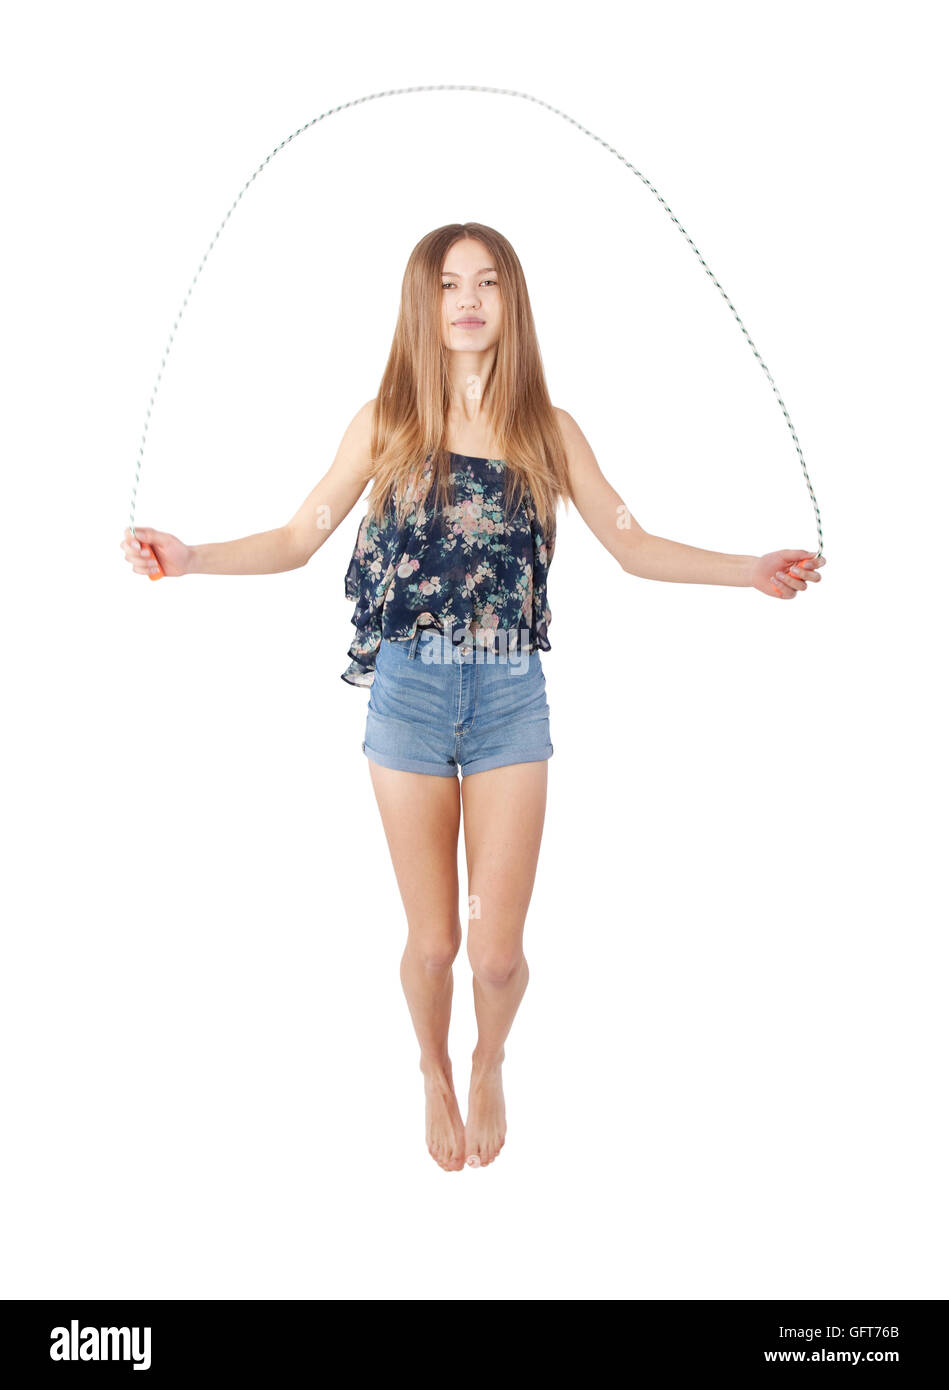 young girl with a skipping rope Stock Photo